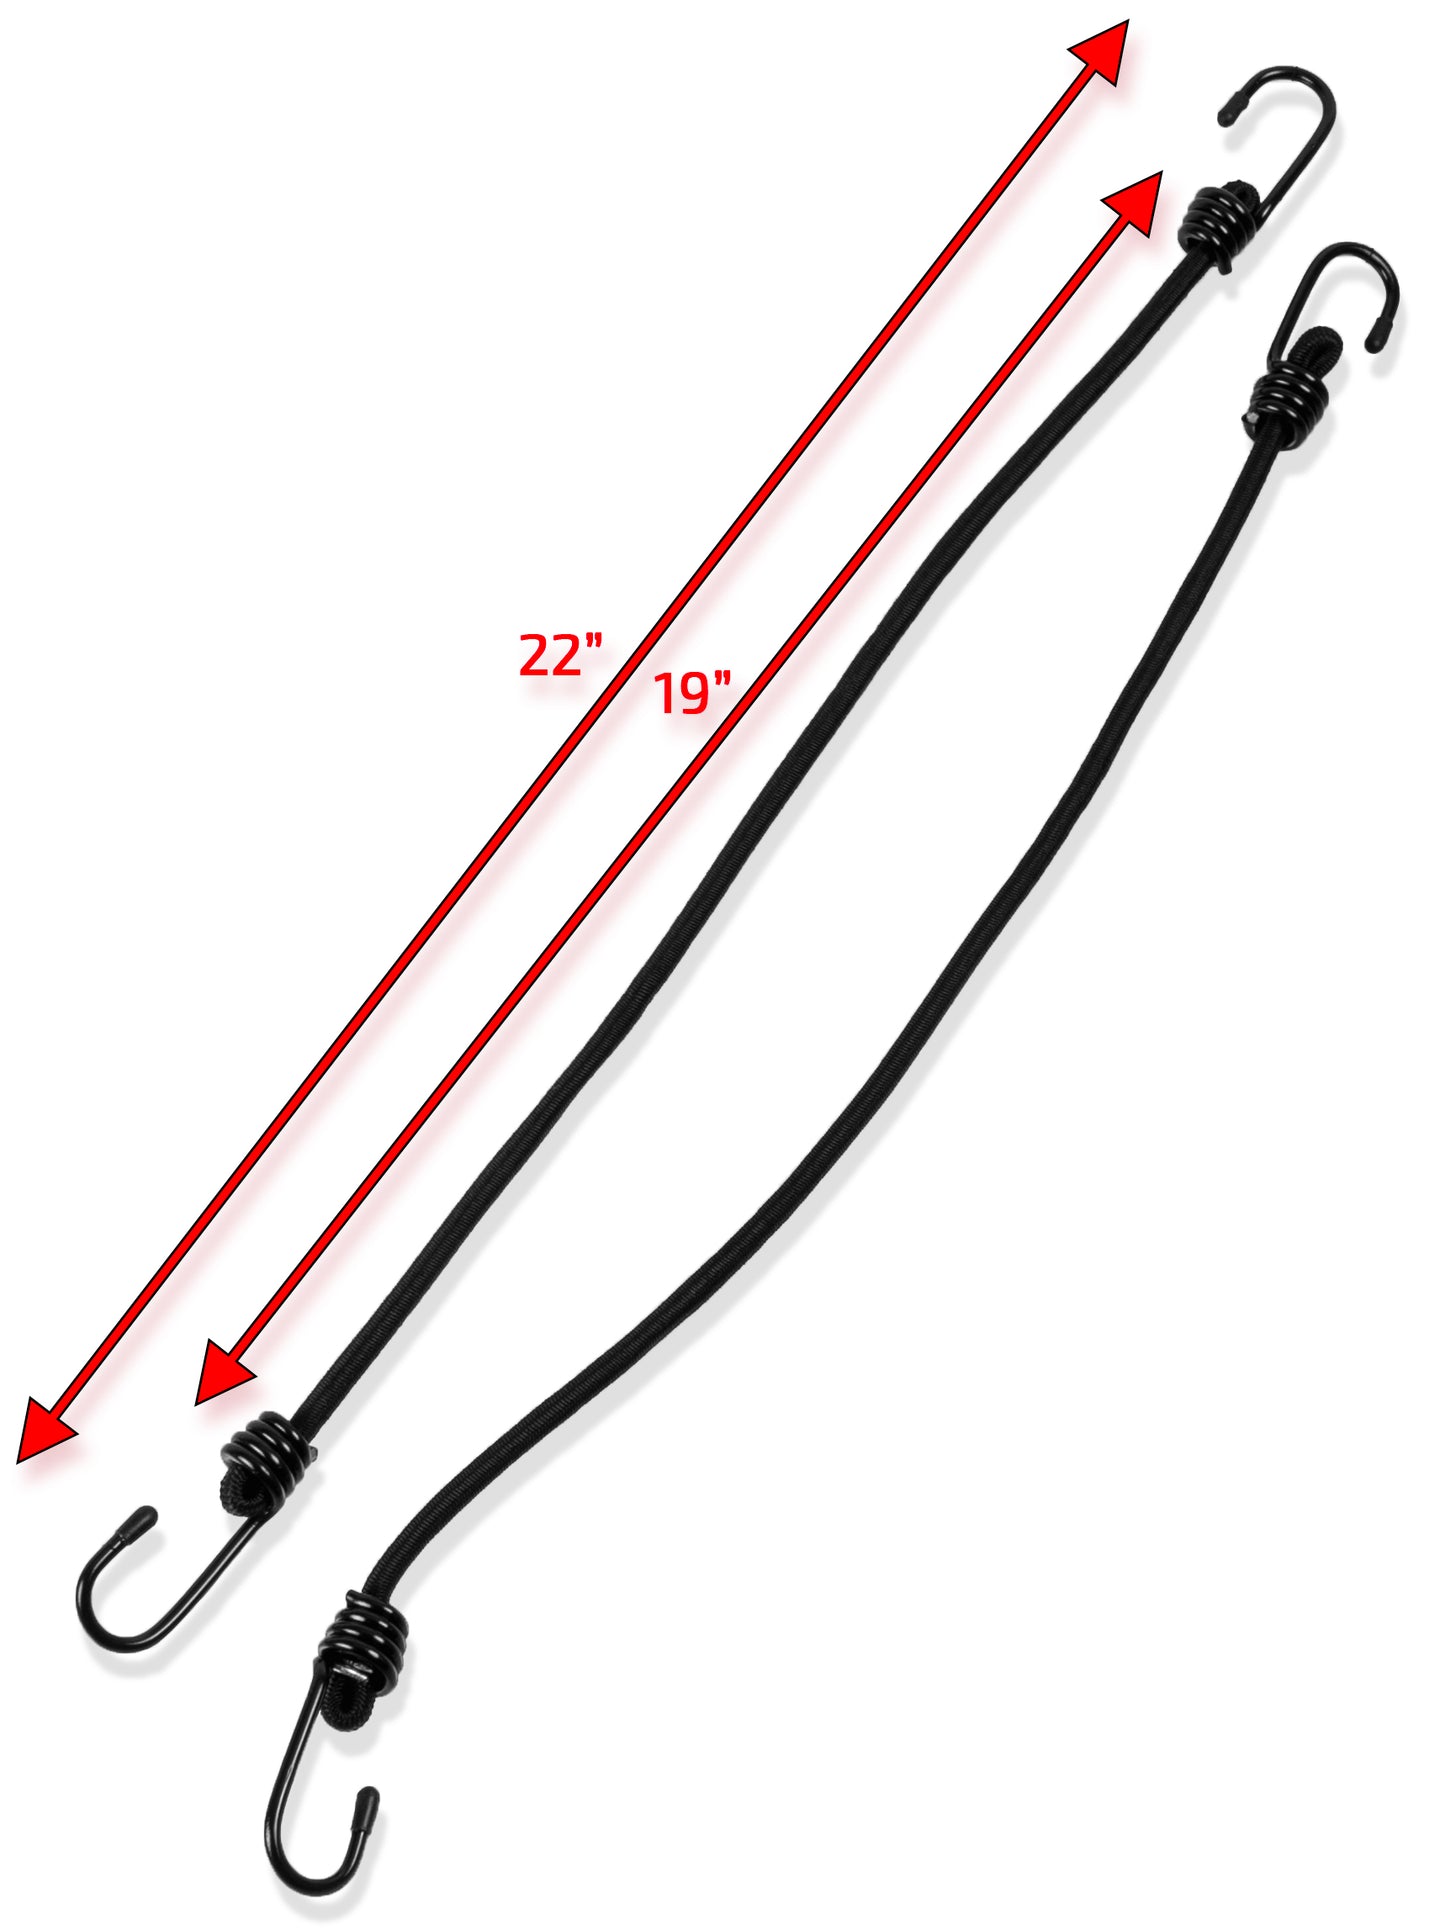 Bungee Mount Tail Trunk Bungee Cords